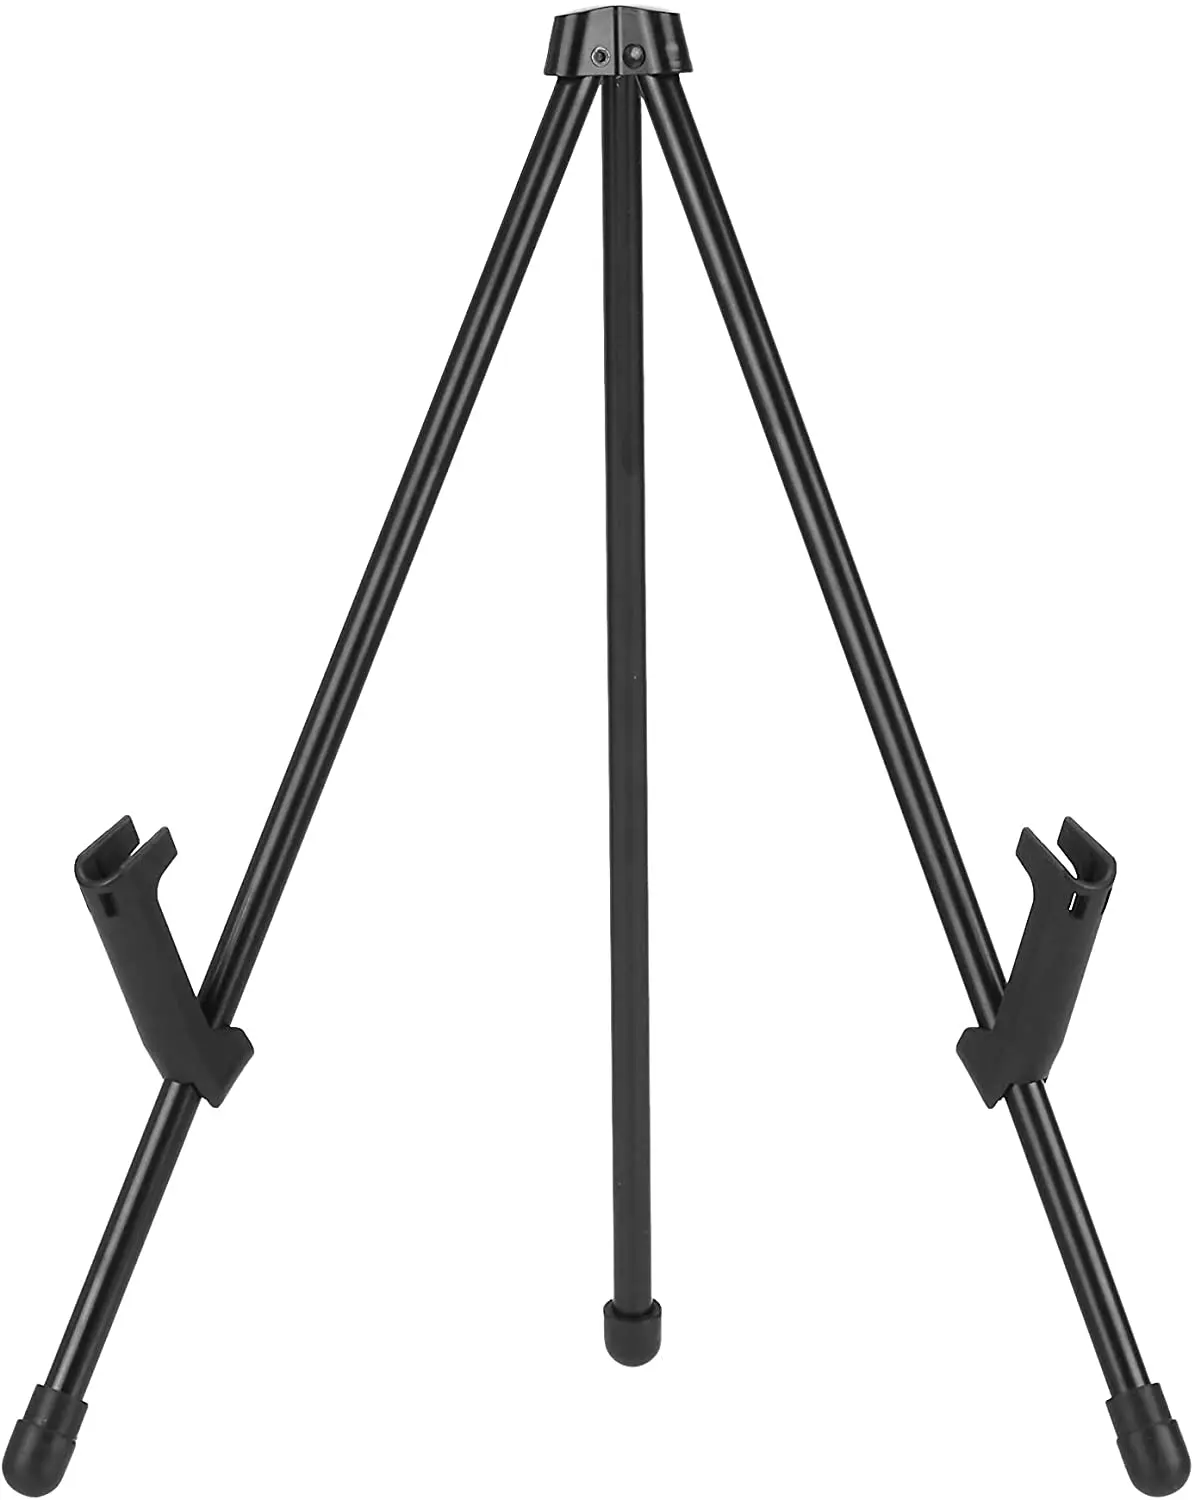 Tabletop Instant Easel – Statief, Supports 5 lbs